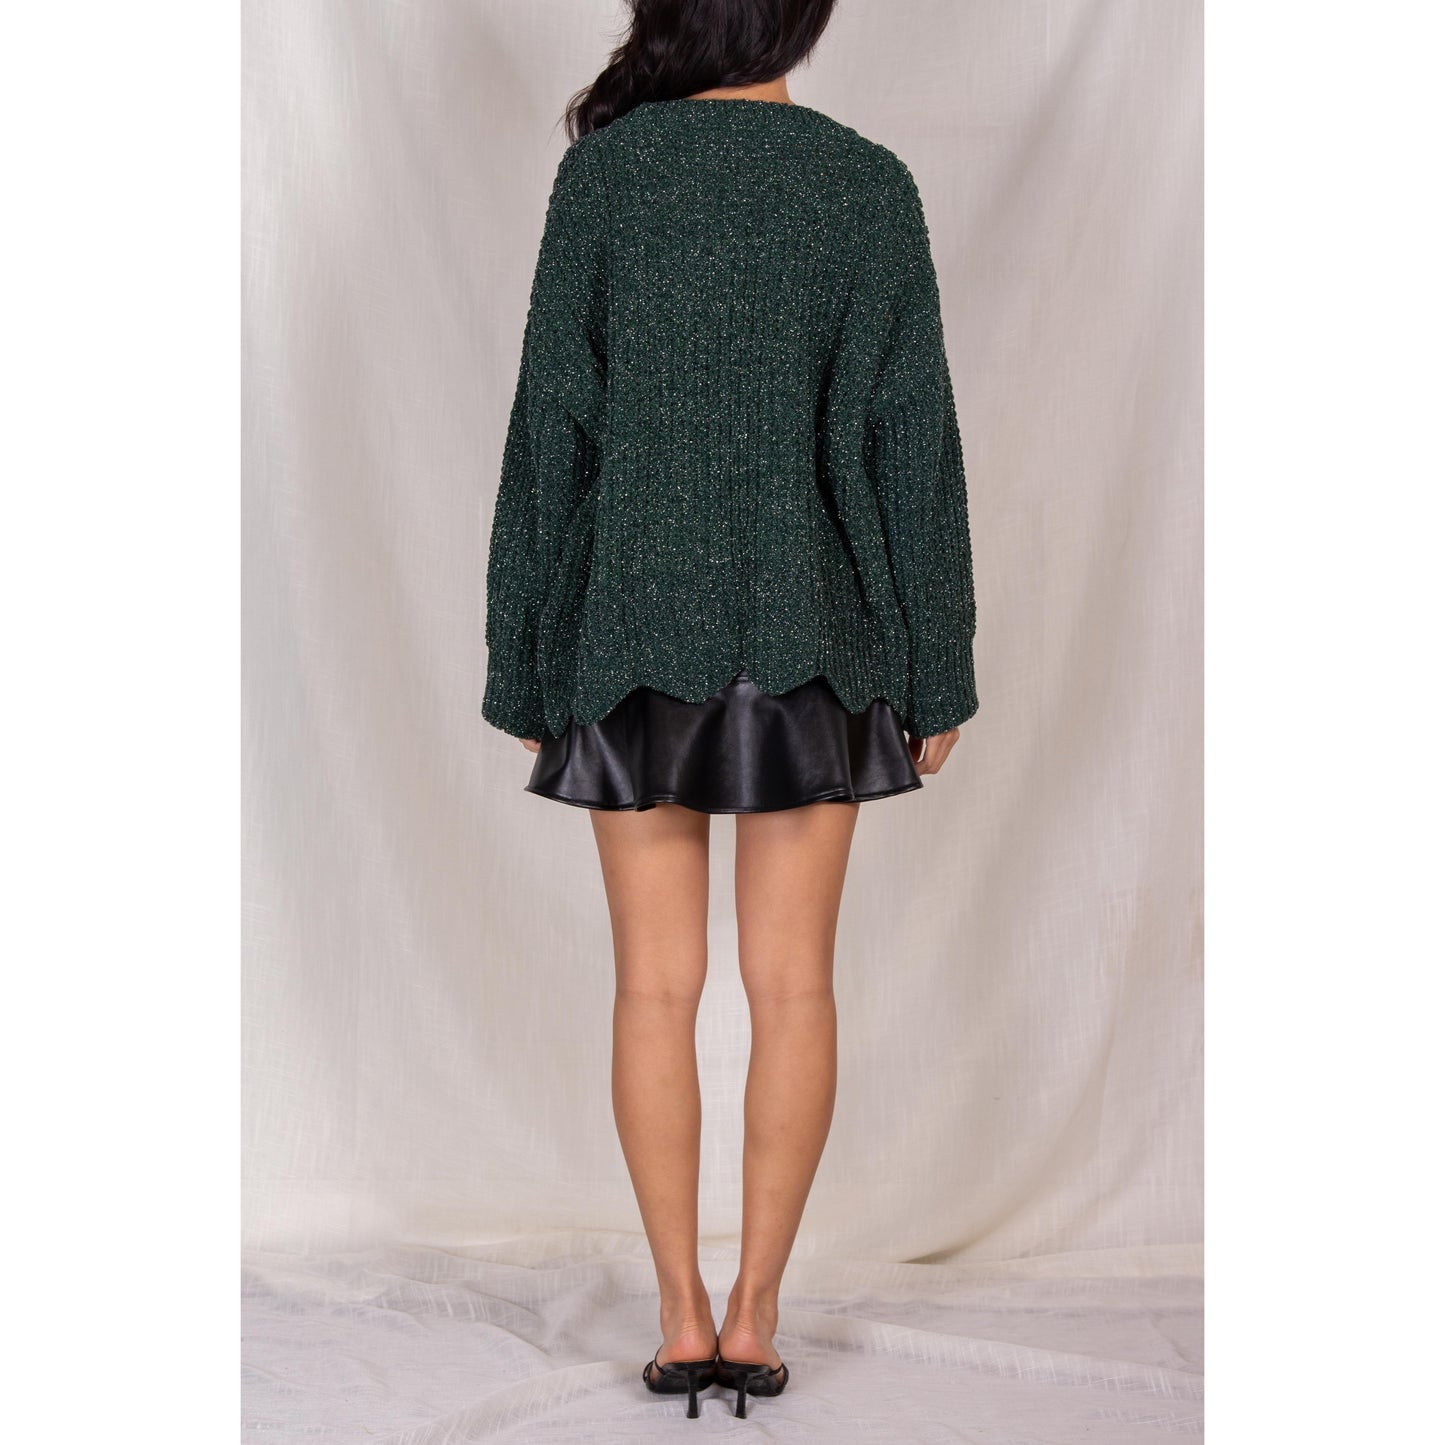 Before You - Shimmer Knit Scalloped Hem Sweater - Emerald